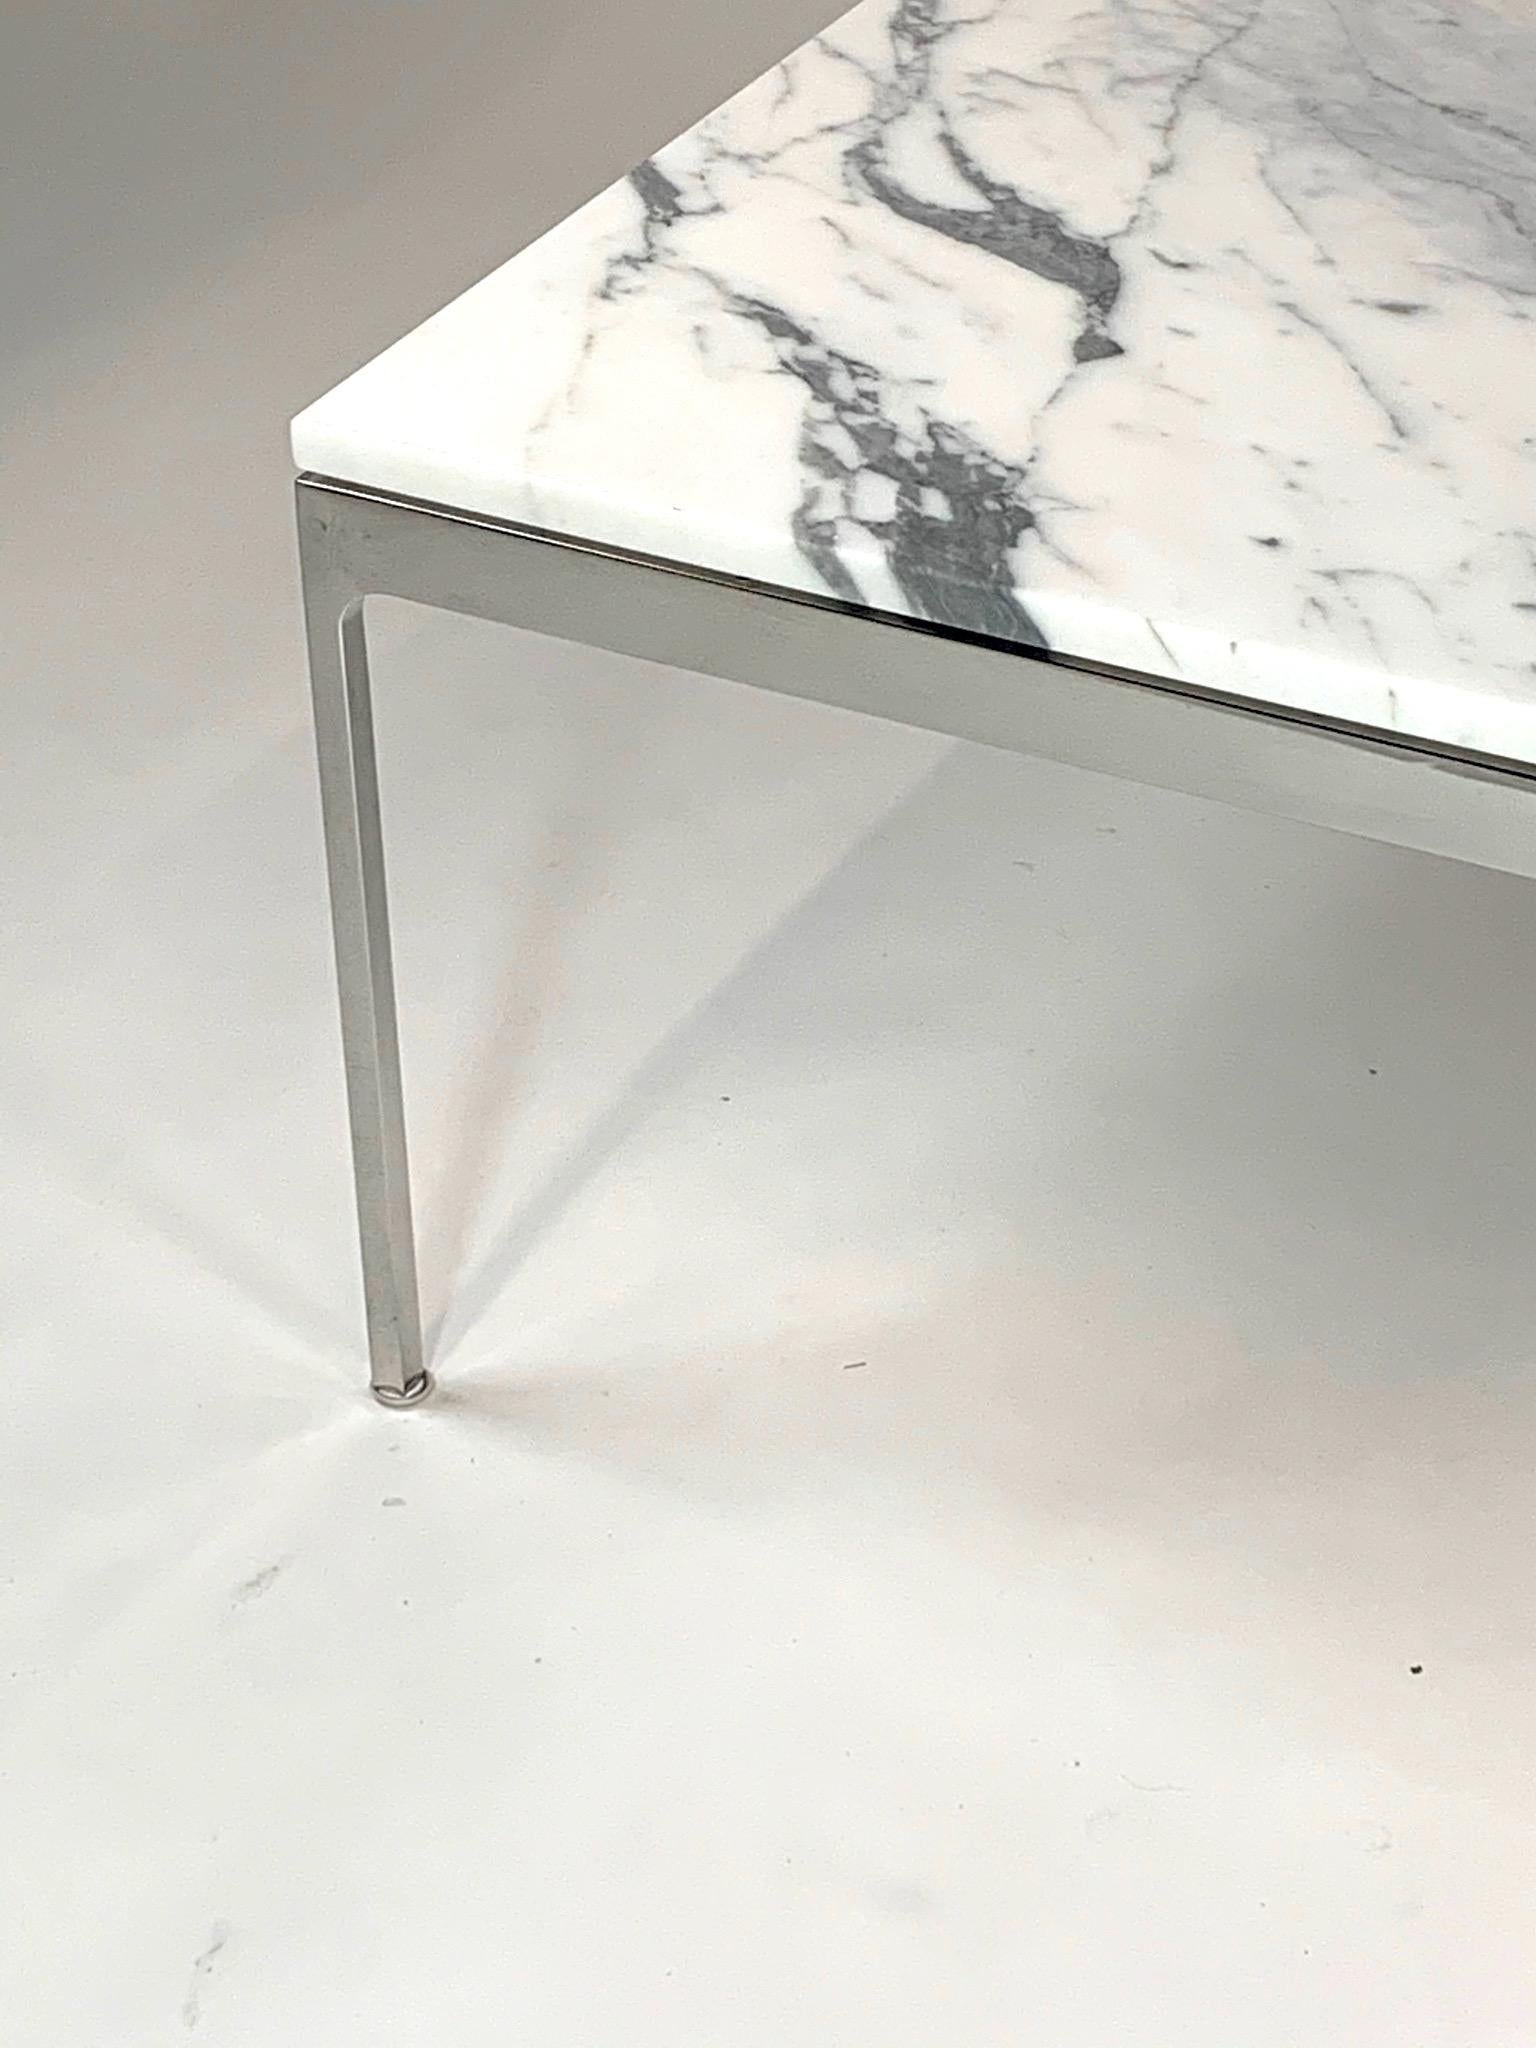 Impressive 42 inch square Nicos Zographos stainless steel and marble 35 series low coffee table. A beautiful highly figured piece of stone.